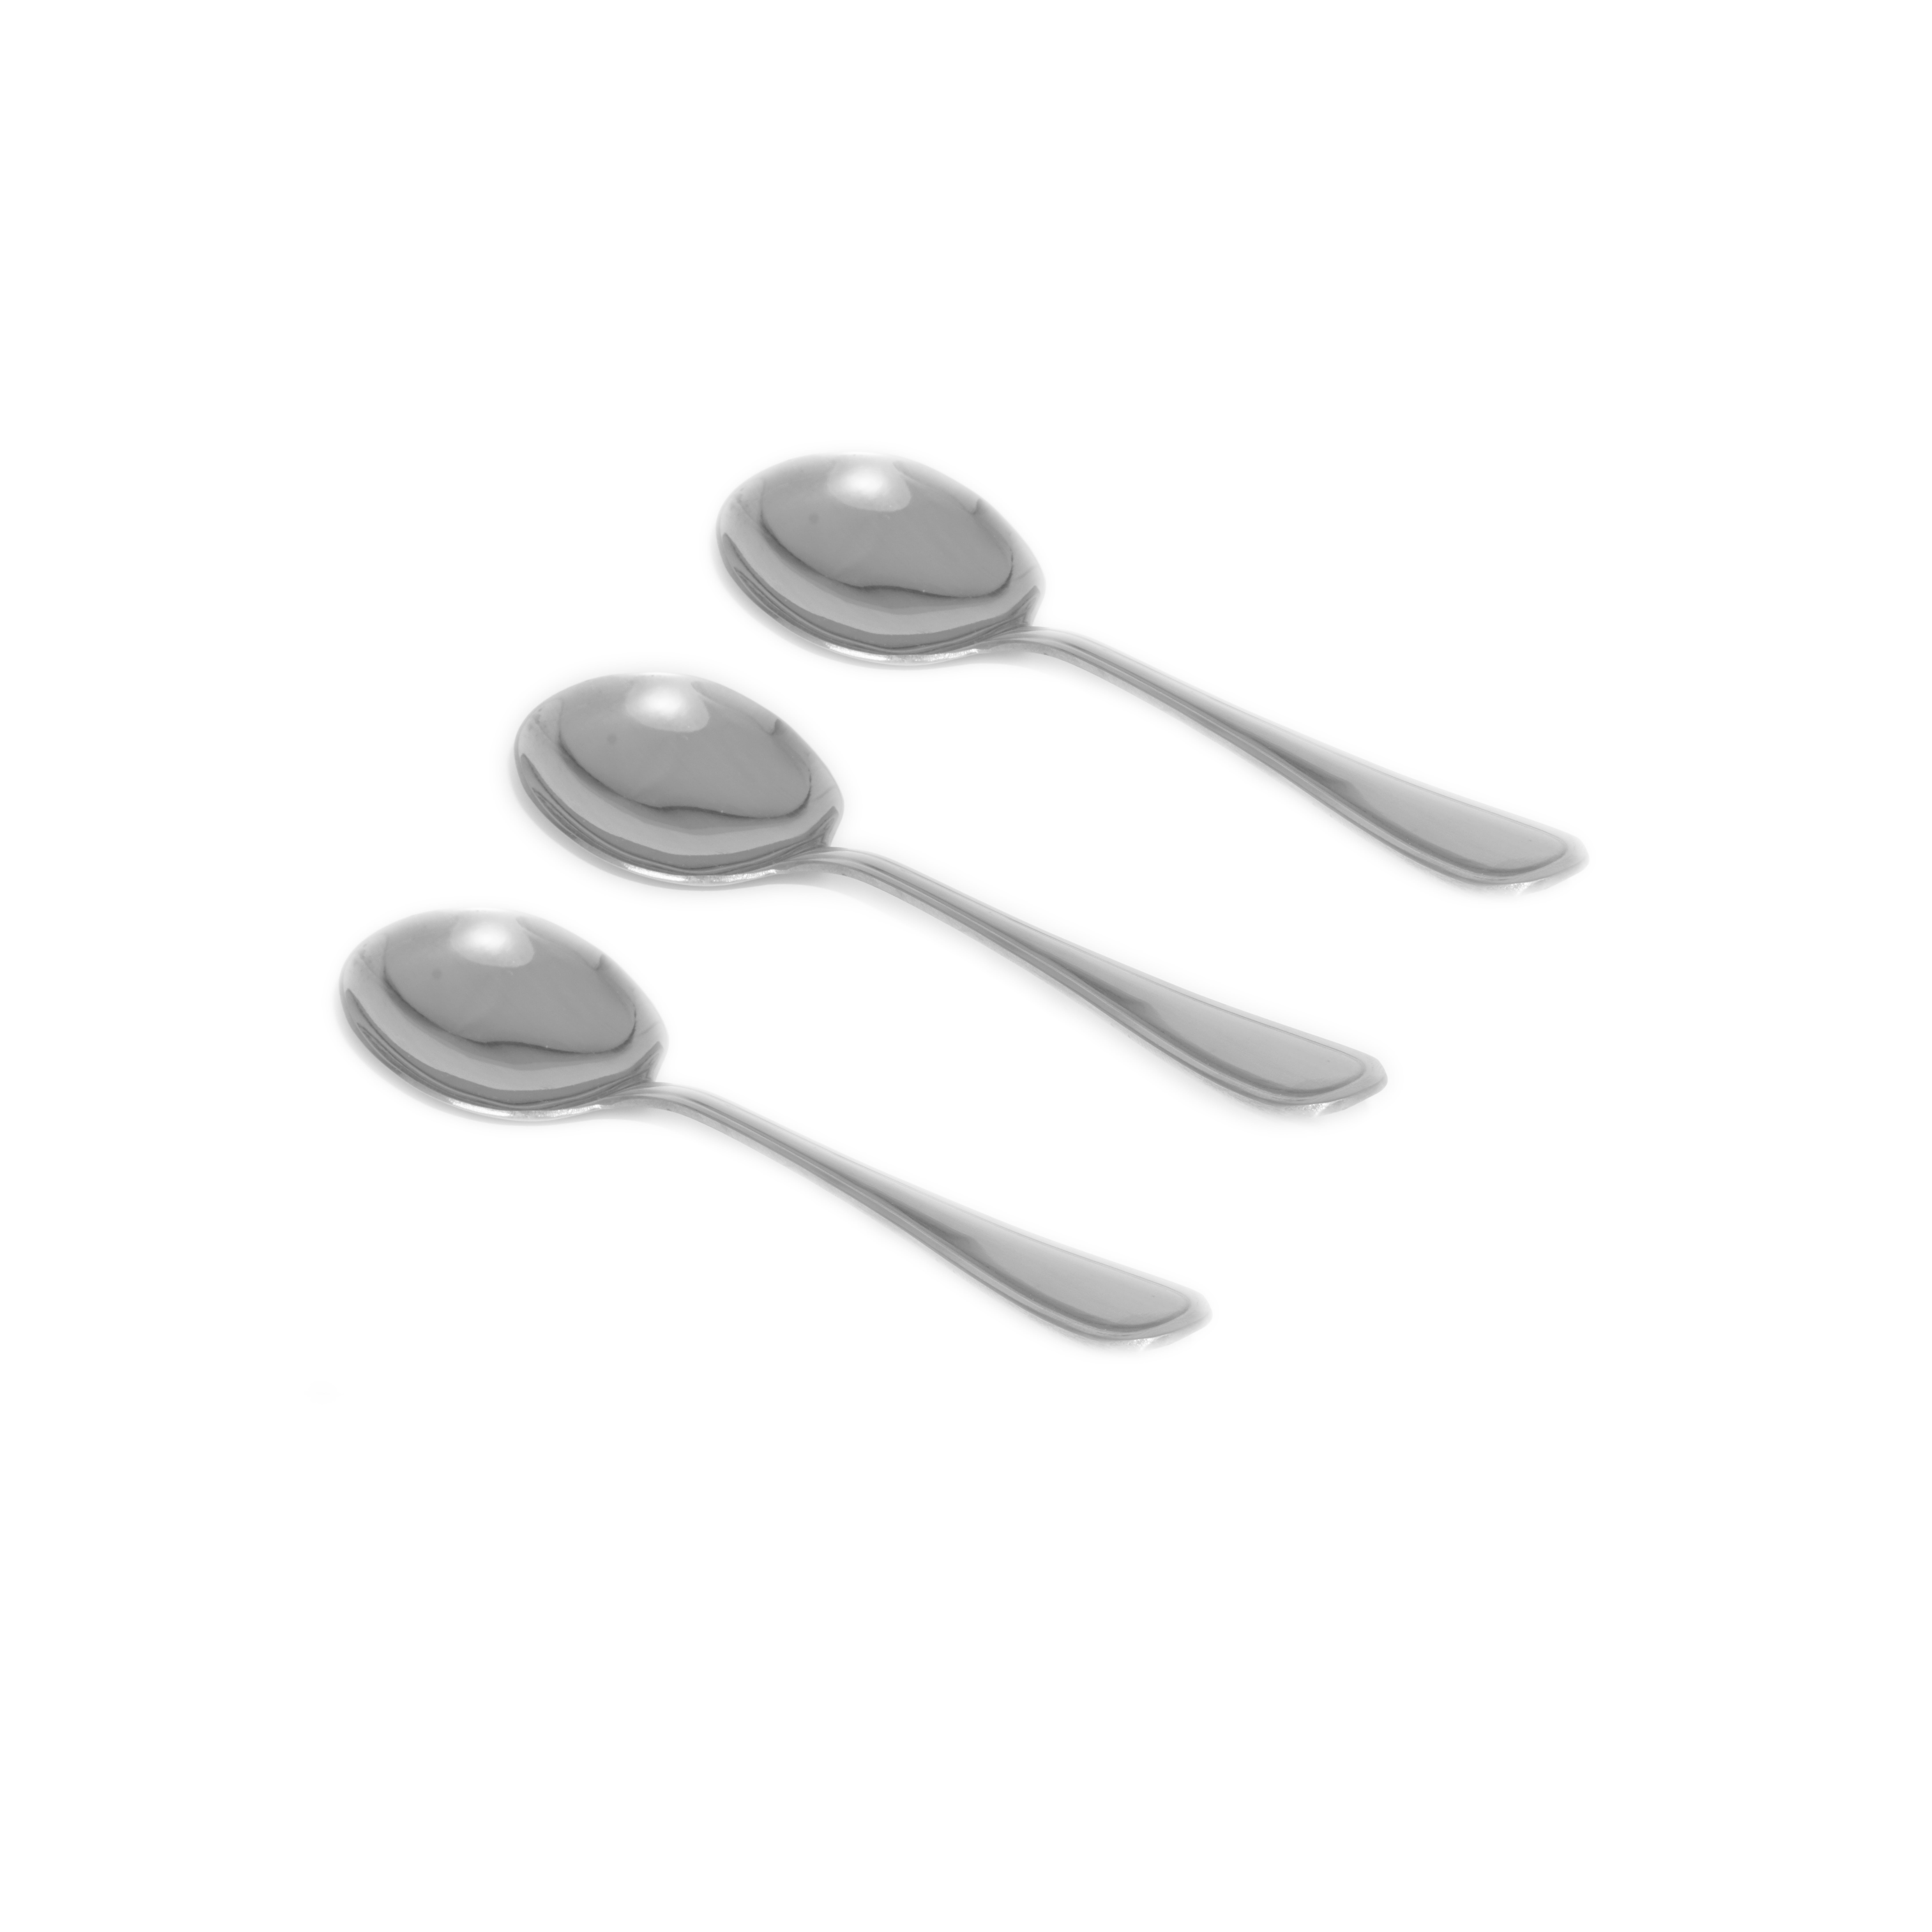 Small LOHOME Table Spoon Set of 4 PCS Thick Heavy-weight Stainless Steel Soup Spoon Portable Coffee Spoon Teaspoon Table Dinner Spoon Tableware